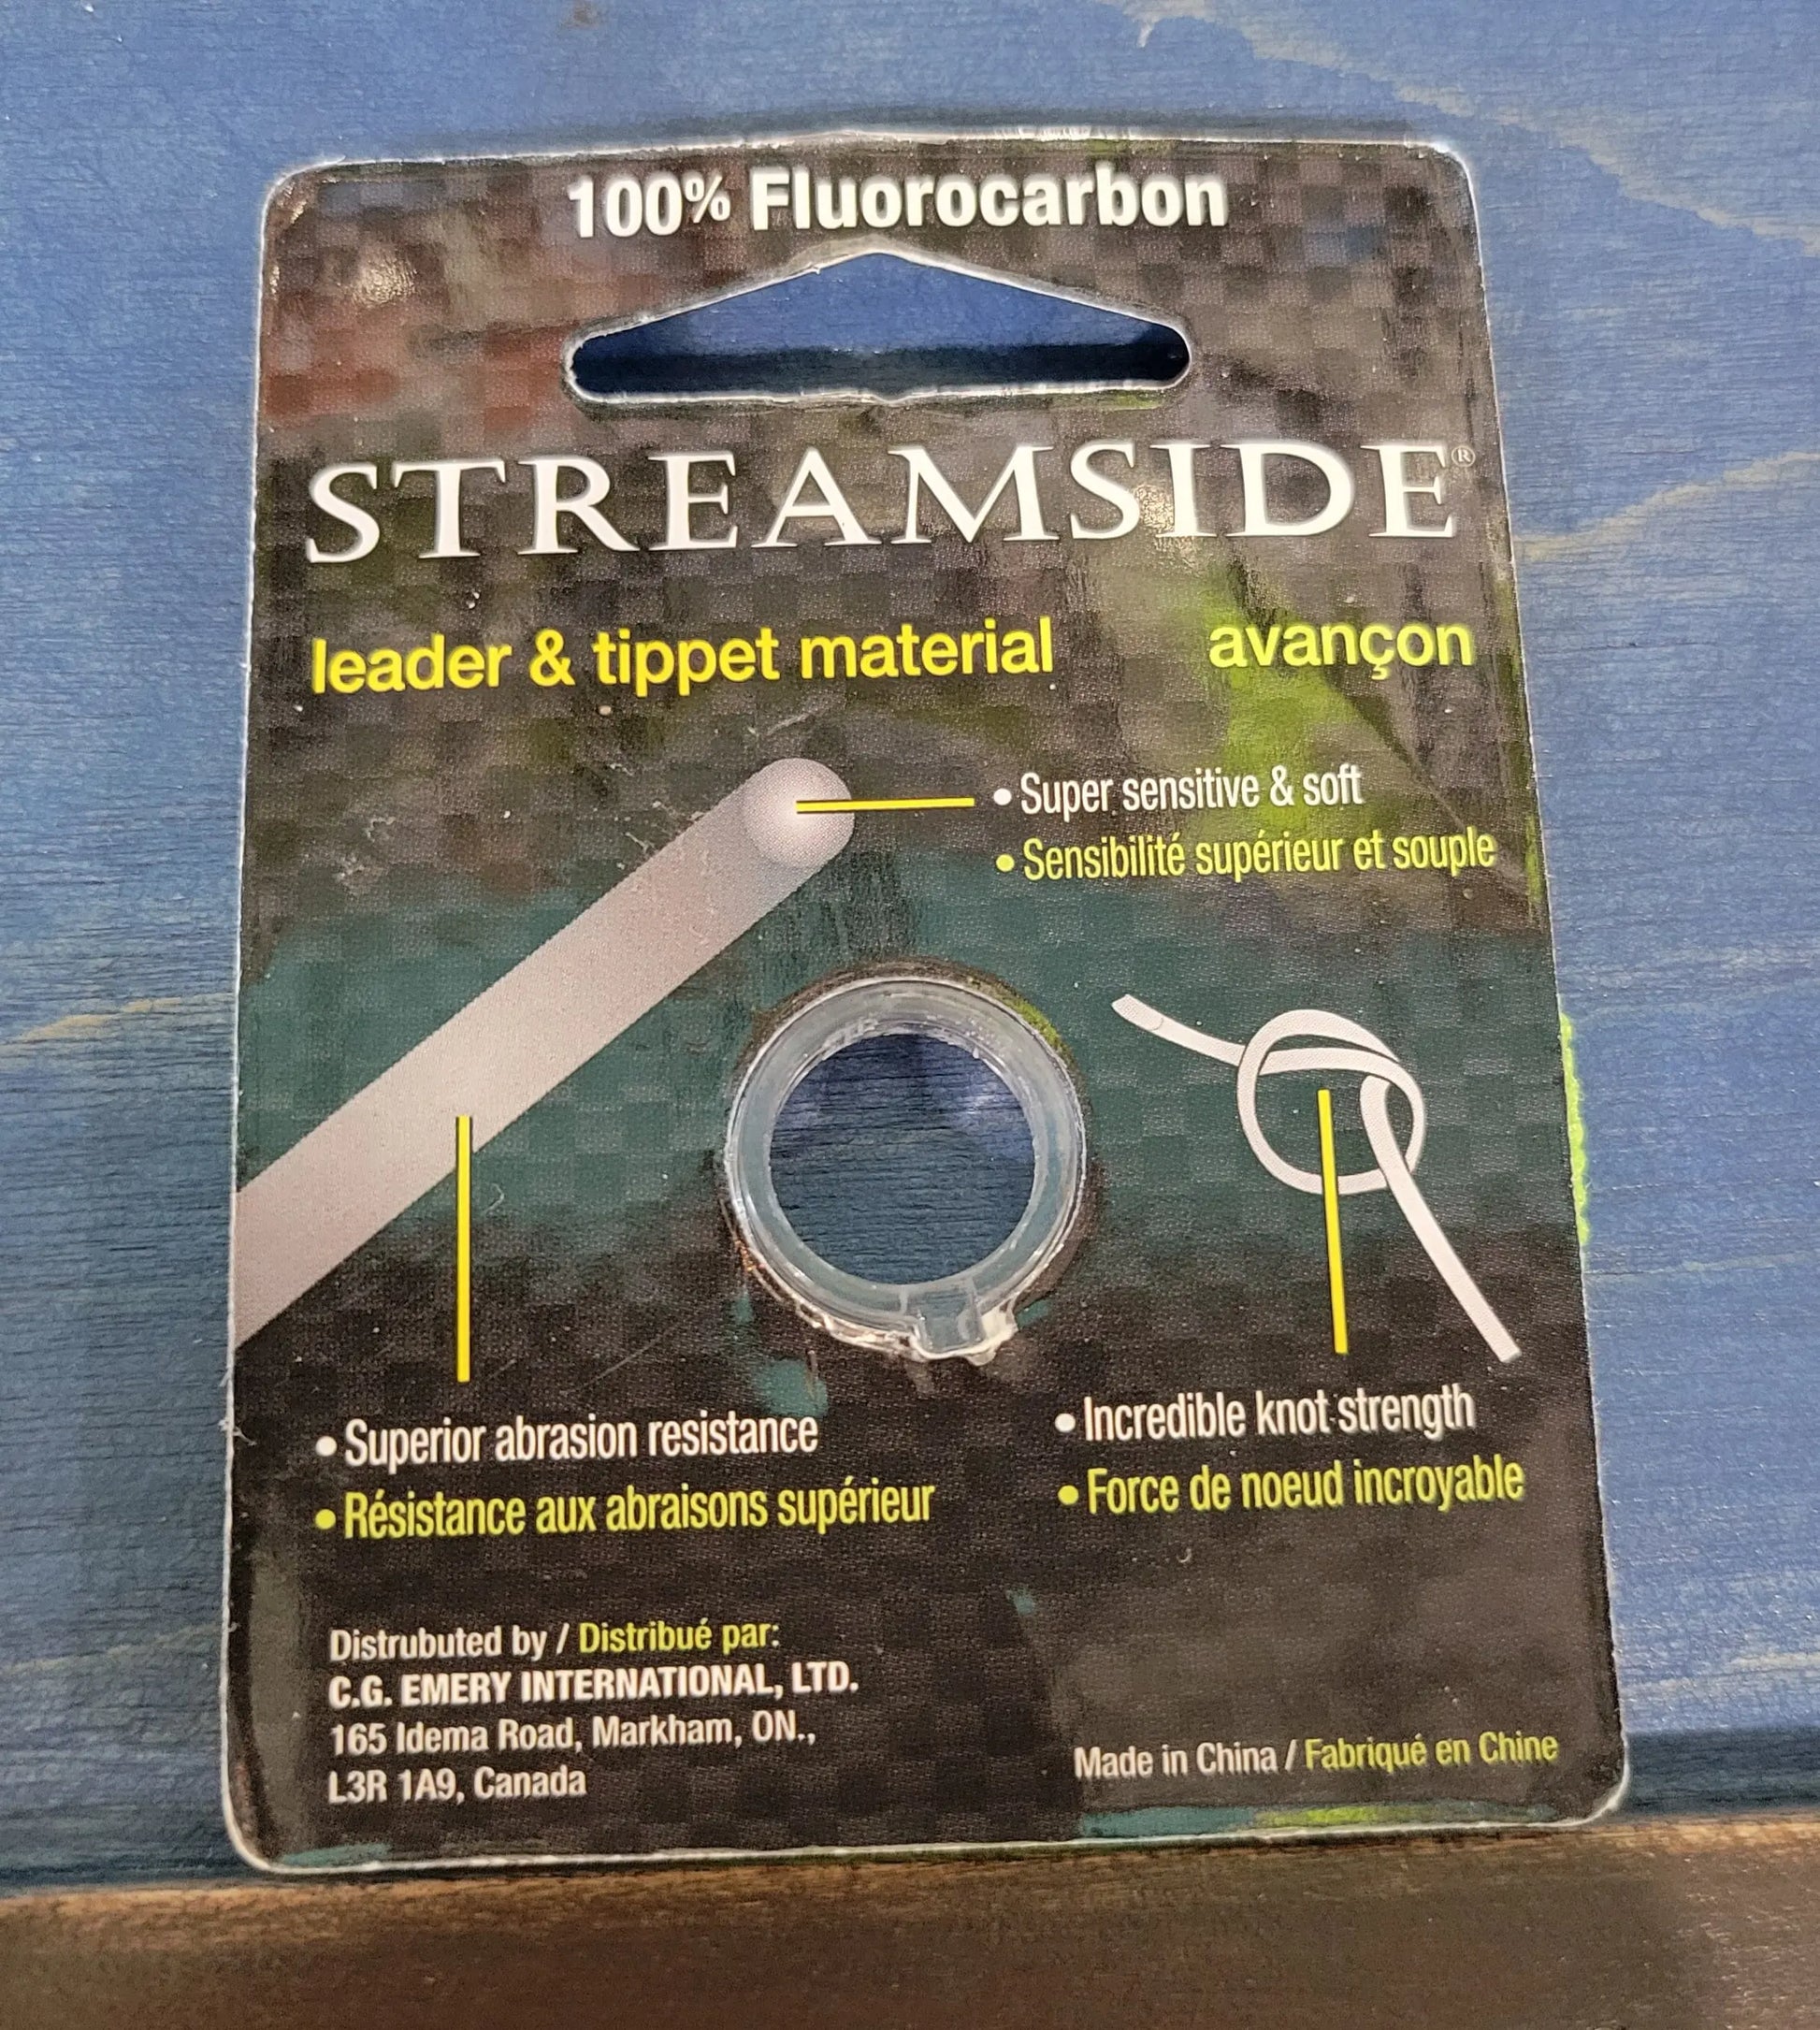 Streamside Fluorocarbon Leader & Tippet Material 3.7lb 30m C.G. Emery